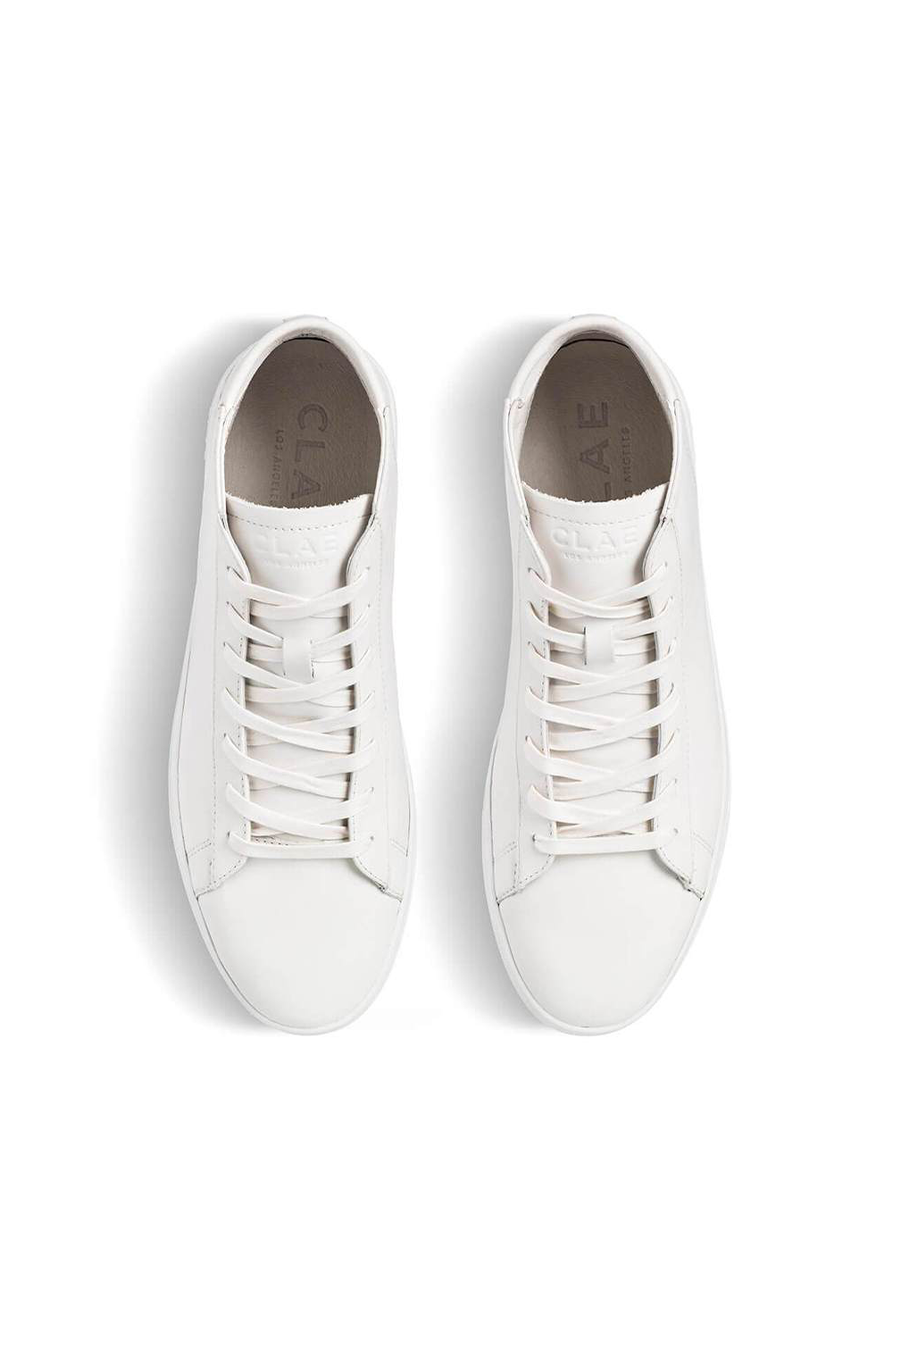 Bradley Mid | Triple White Leather - Main Image Number 2 of 3